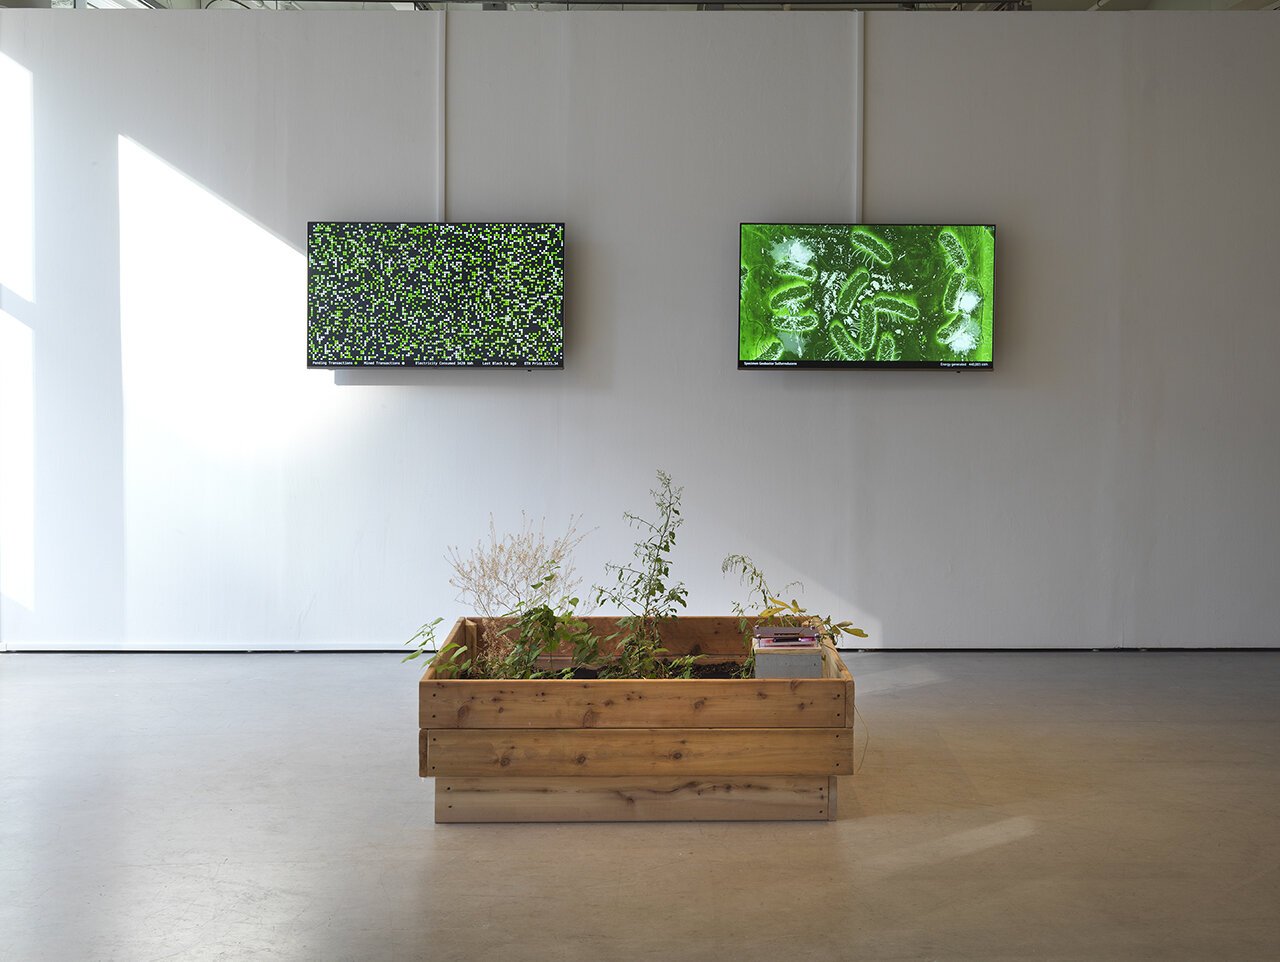  Stephanie Rothenberg,  Proof of Soil , installation view,  Re: Working Labor , Sullivan Galleries, School of the Art Institute of Chicago, 2019. Photo: Tom Van Eynde 